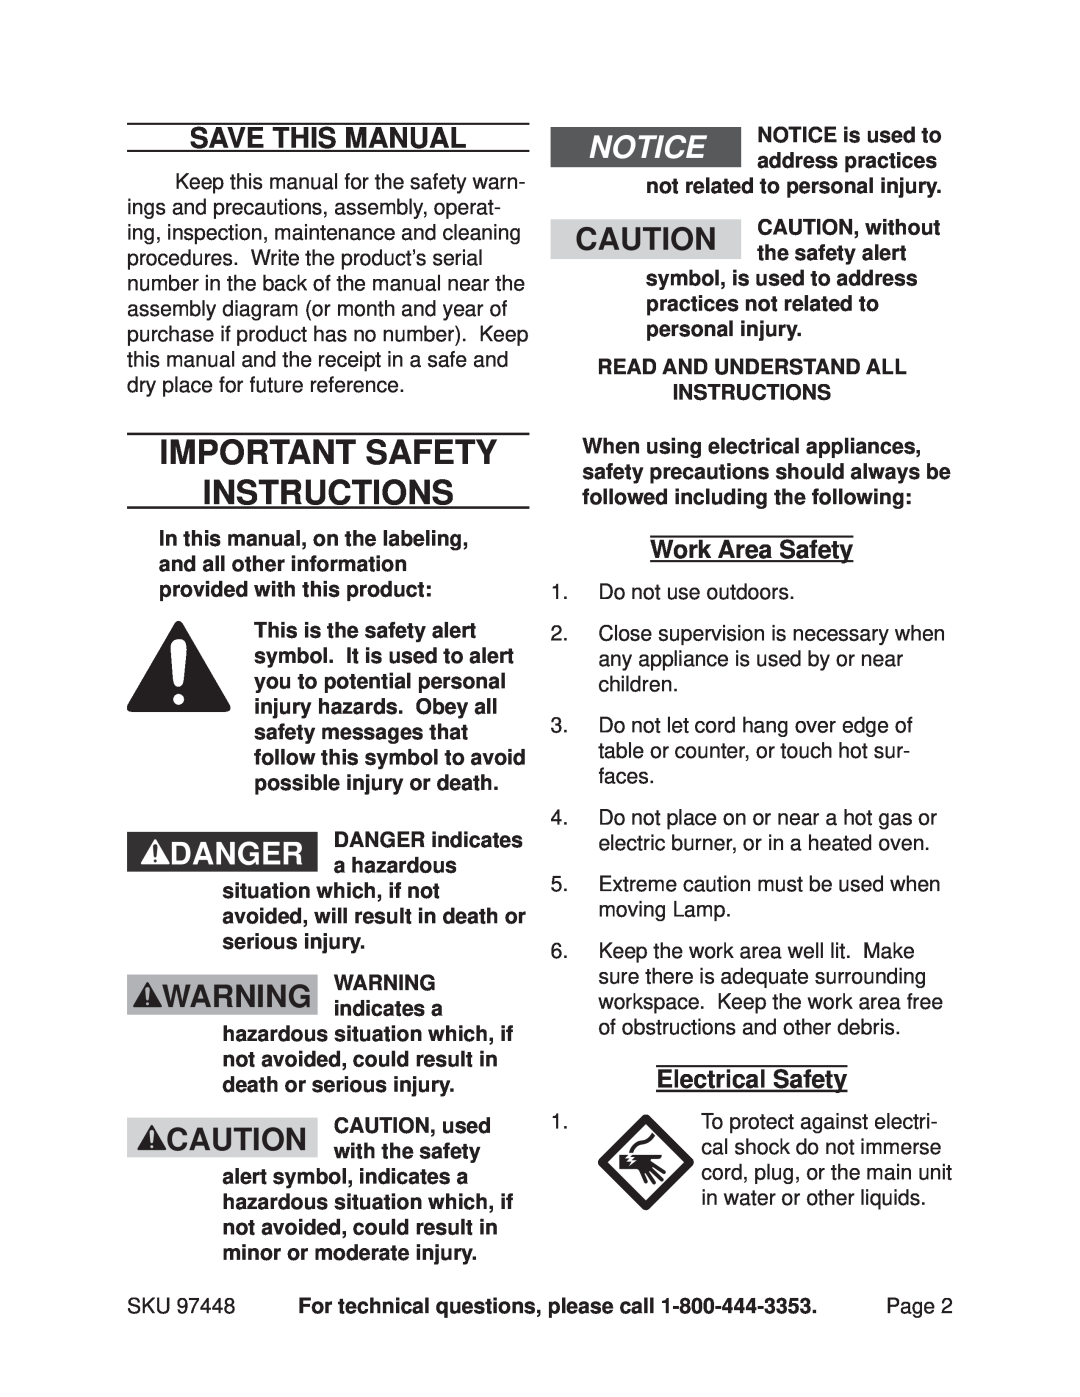 Chicago Electric 97448 Important Safety Instructions, Save This Manual, Work Area Safety, Electrical Safety, a hazardous 